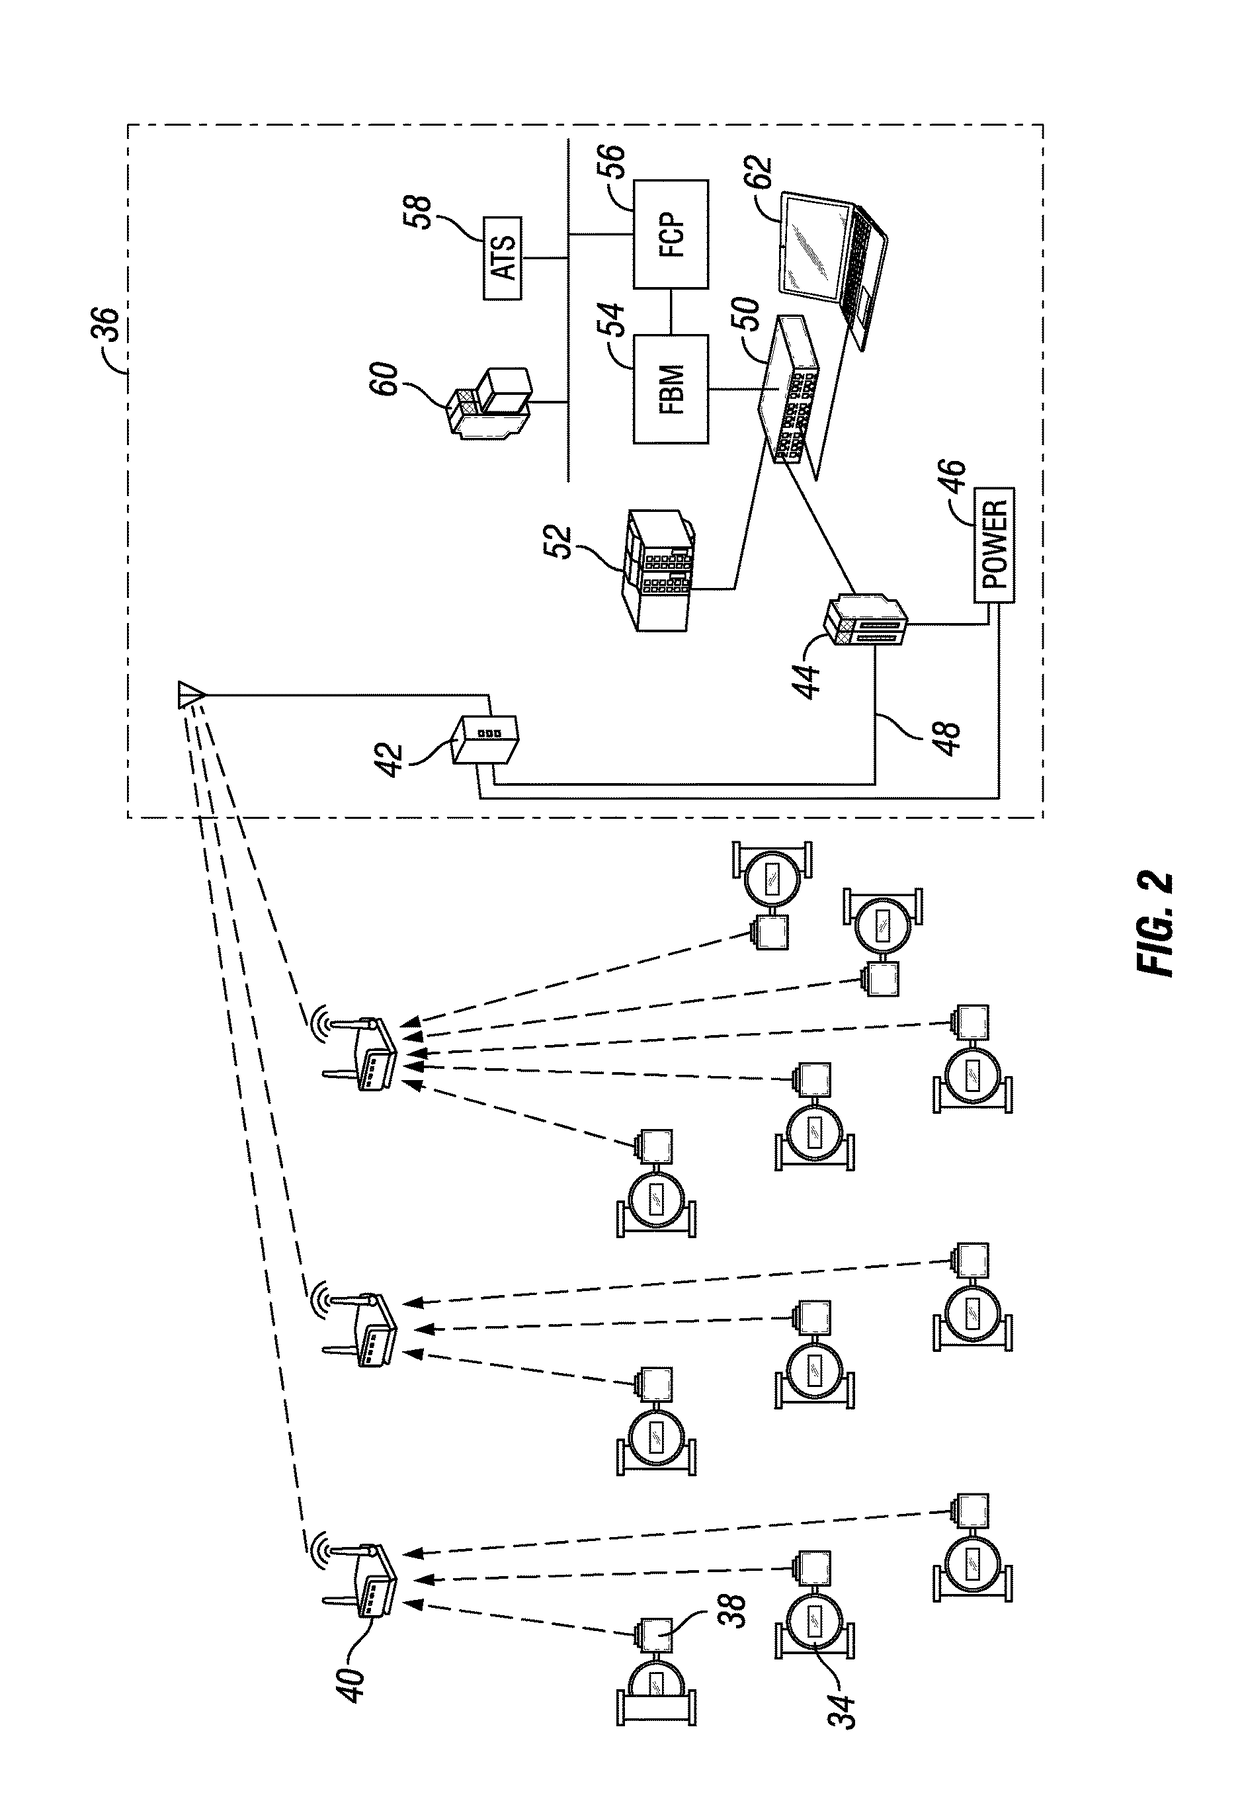 Systems and methods for monitoring and optimizing flare purge gas with a wireless rotameter